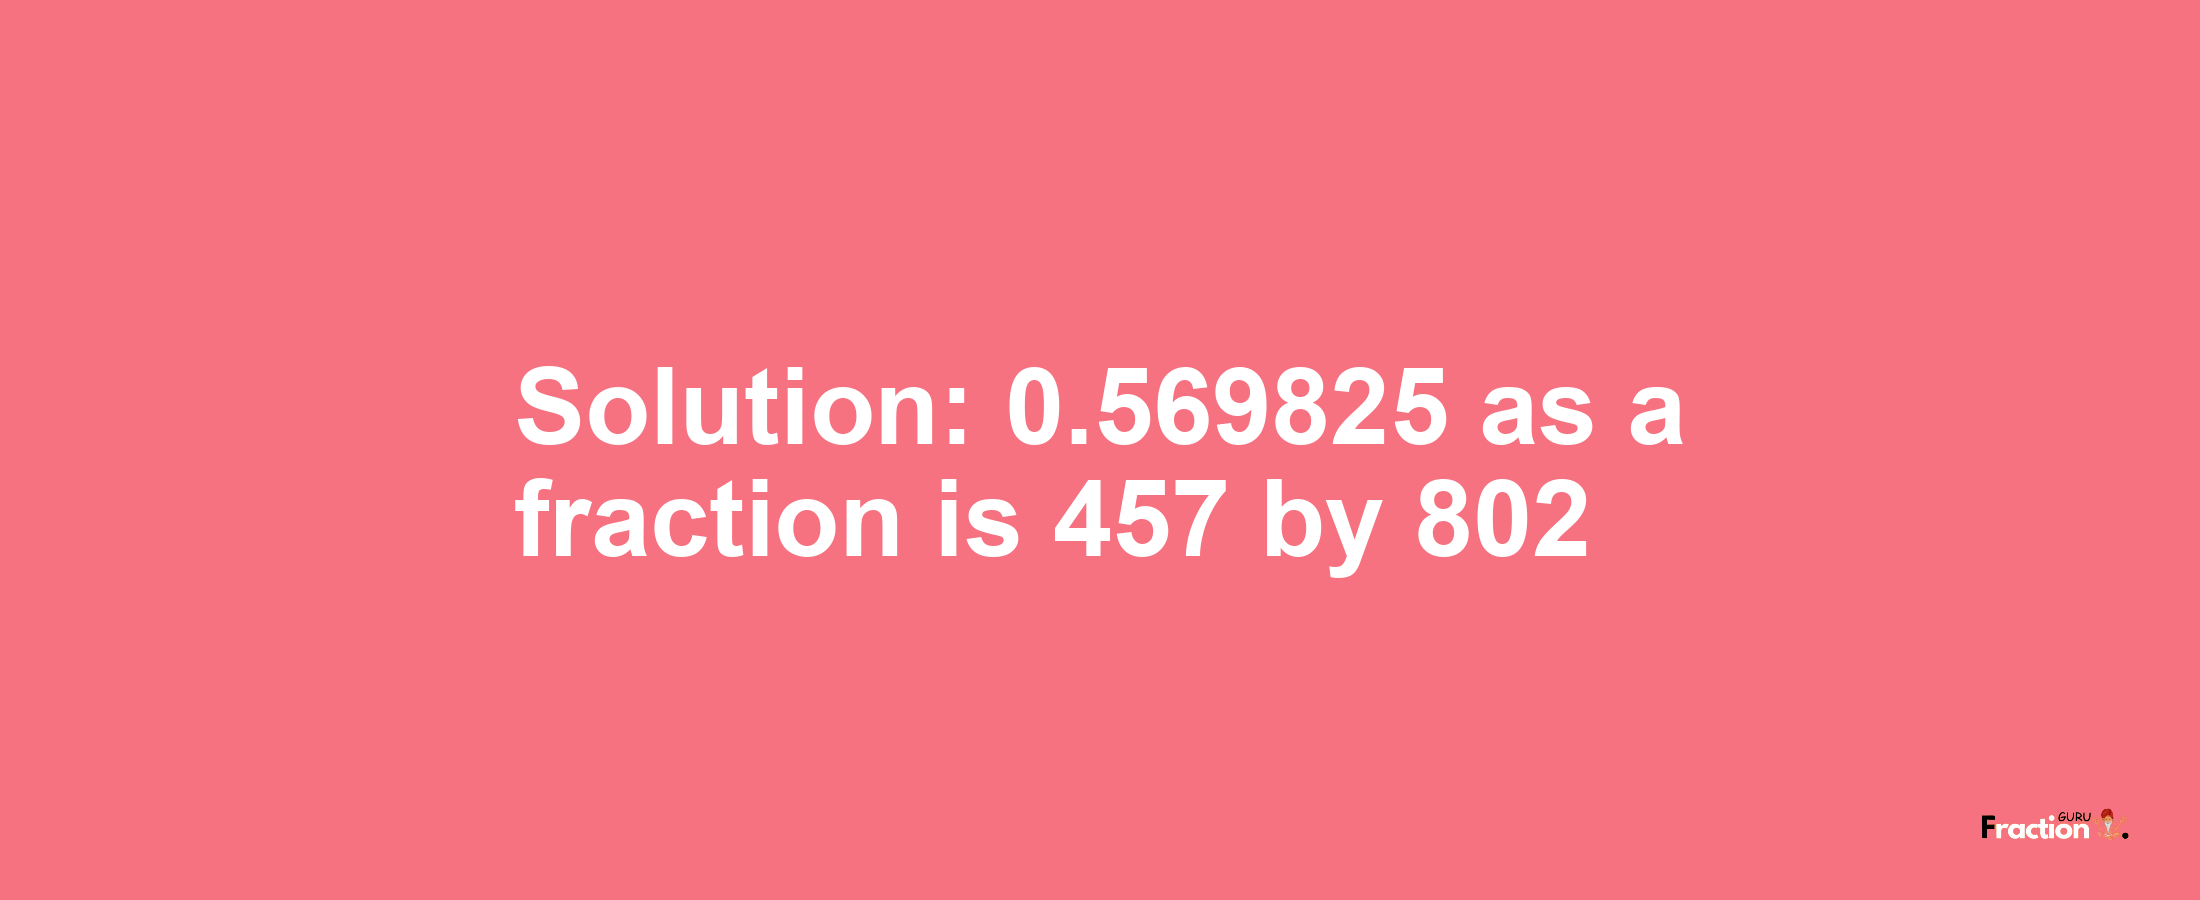 Solution:0.569825 as a fraction is 457/802